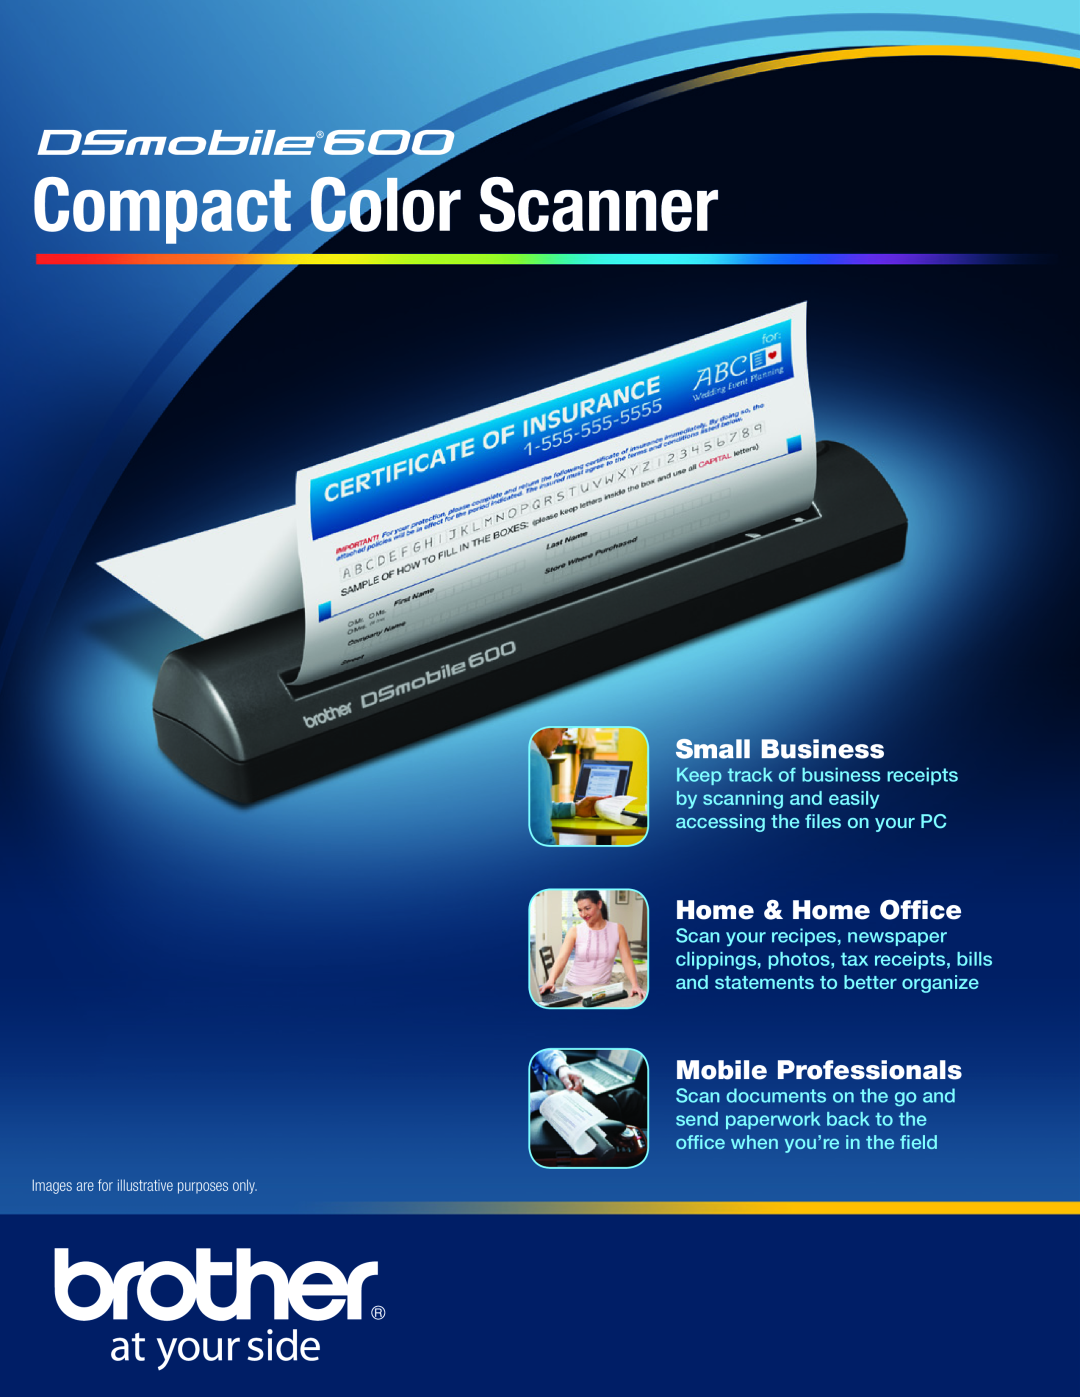 Brother 600 manual Compact Color Scanner, Small Business, Home & Home Office, Mobile Professionals 